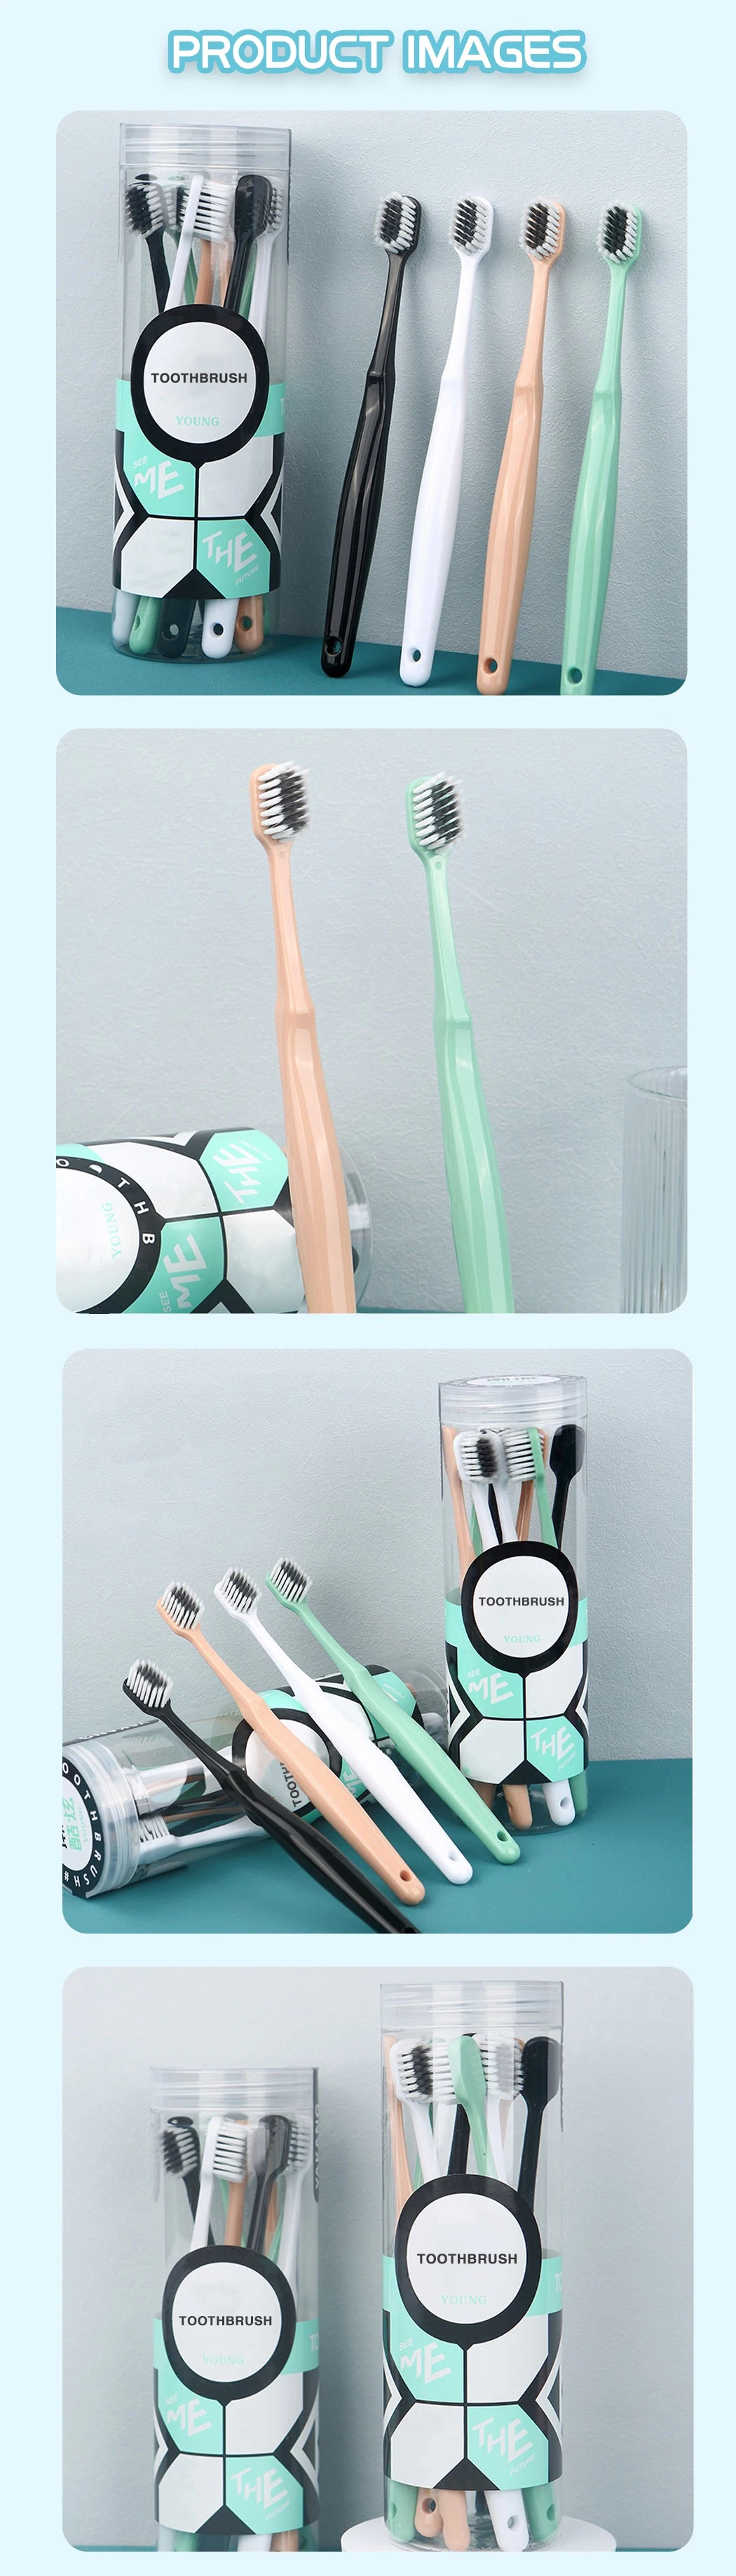 Free Sample Soft PBT &amp; Bamboo Charcoal Bristle Adult Manual Toothbrush